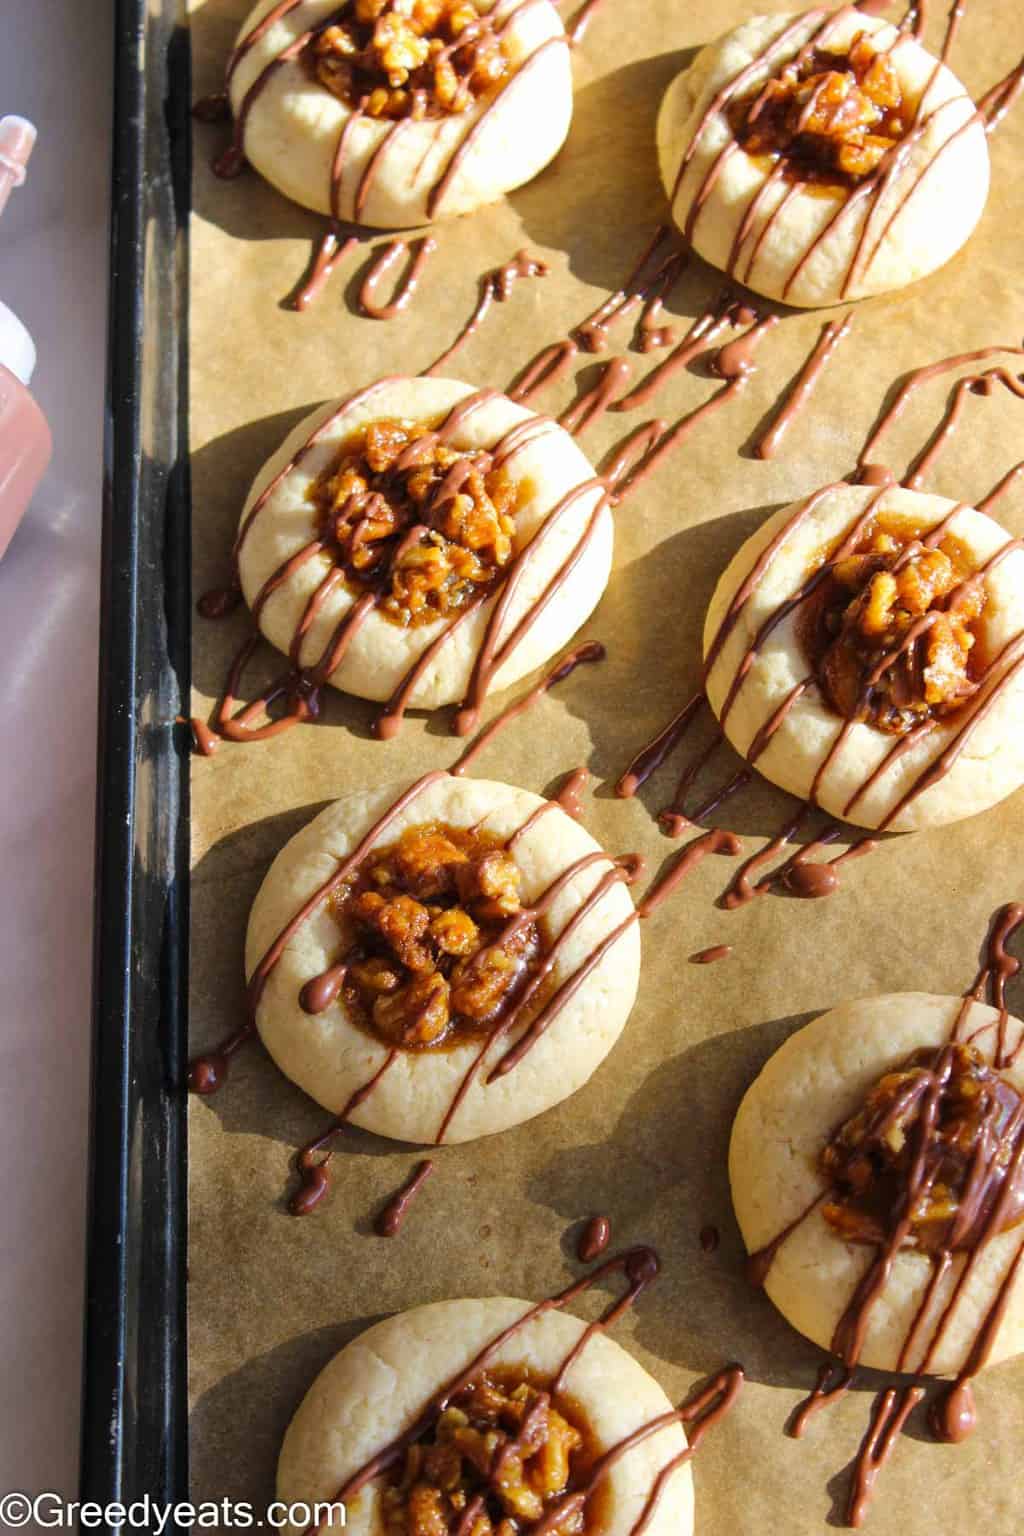 Pecan thumbprint cookies drizzled with melted chocolate will be your most favorite Hoilday cookies!